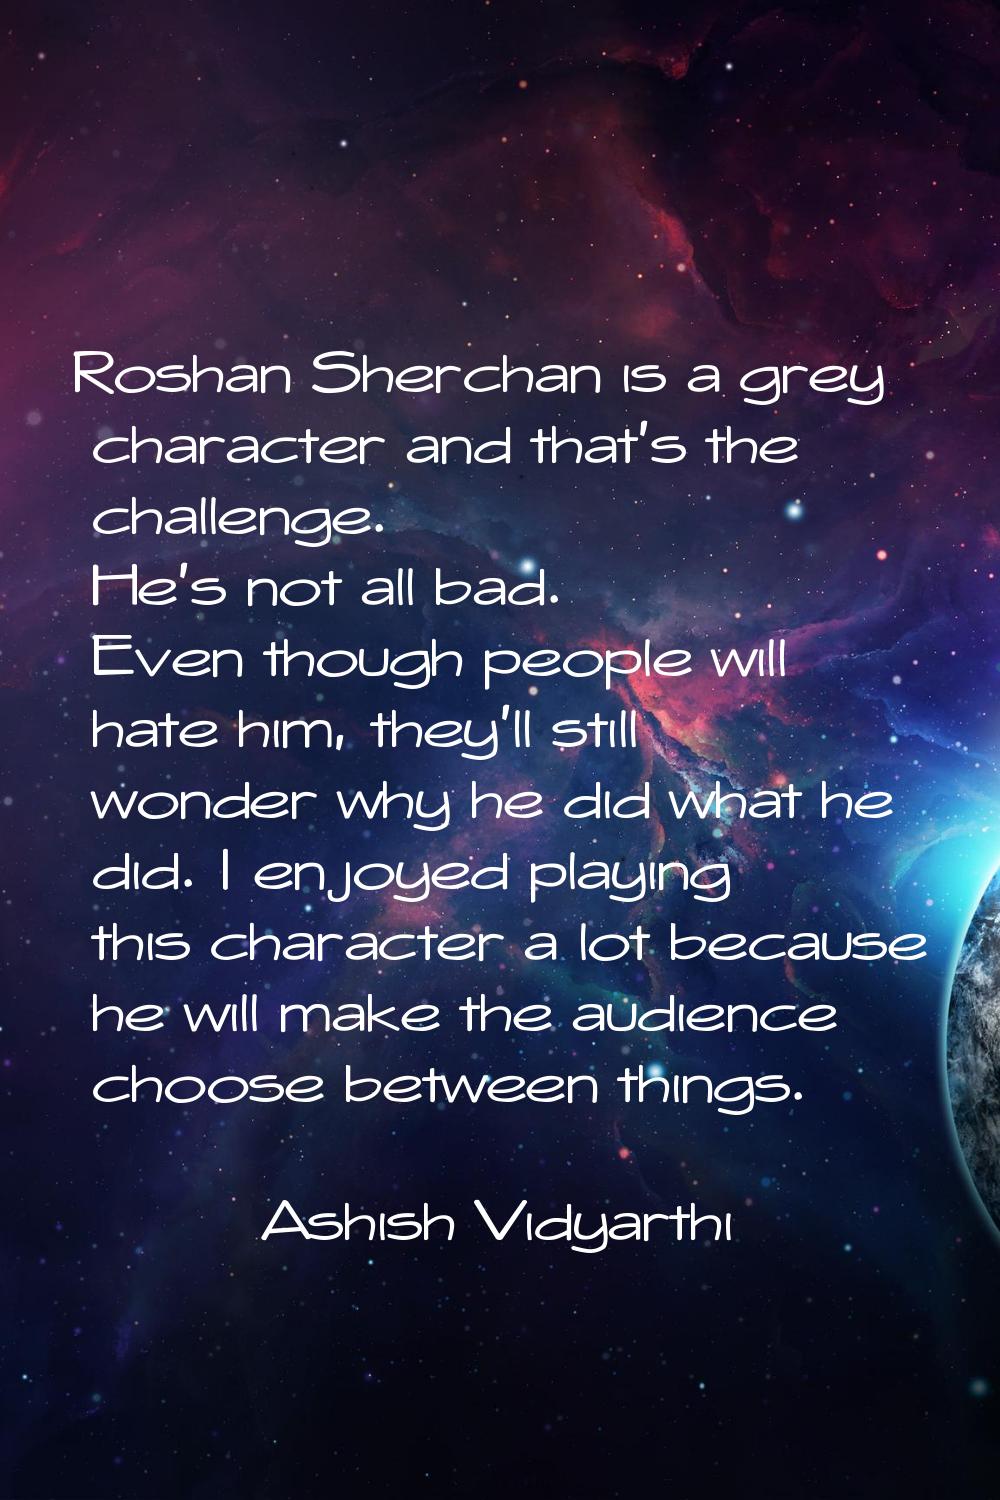 Roshan Sherchan is a grey character and that's the challenge. He's not all bad. Even though people 